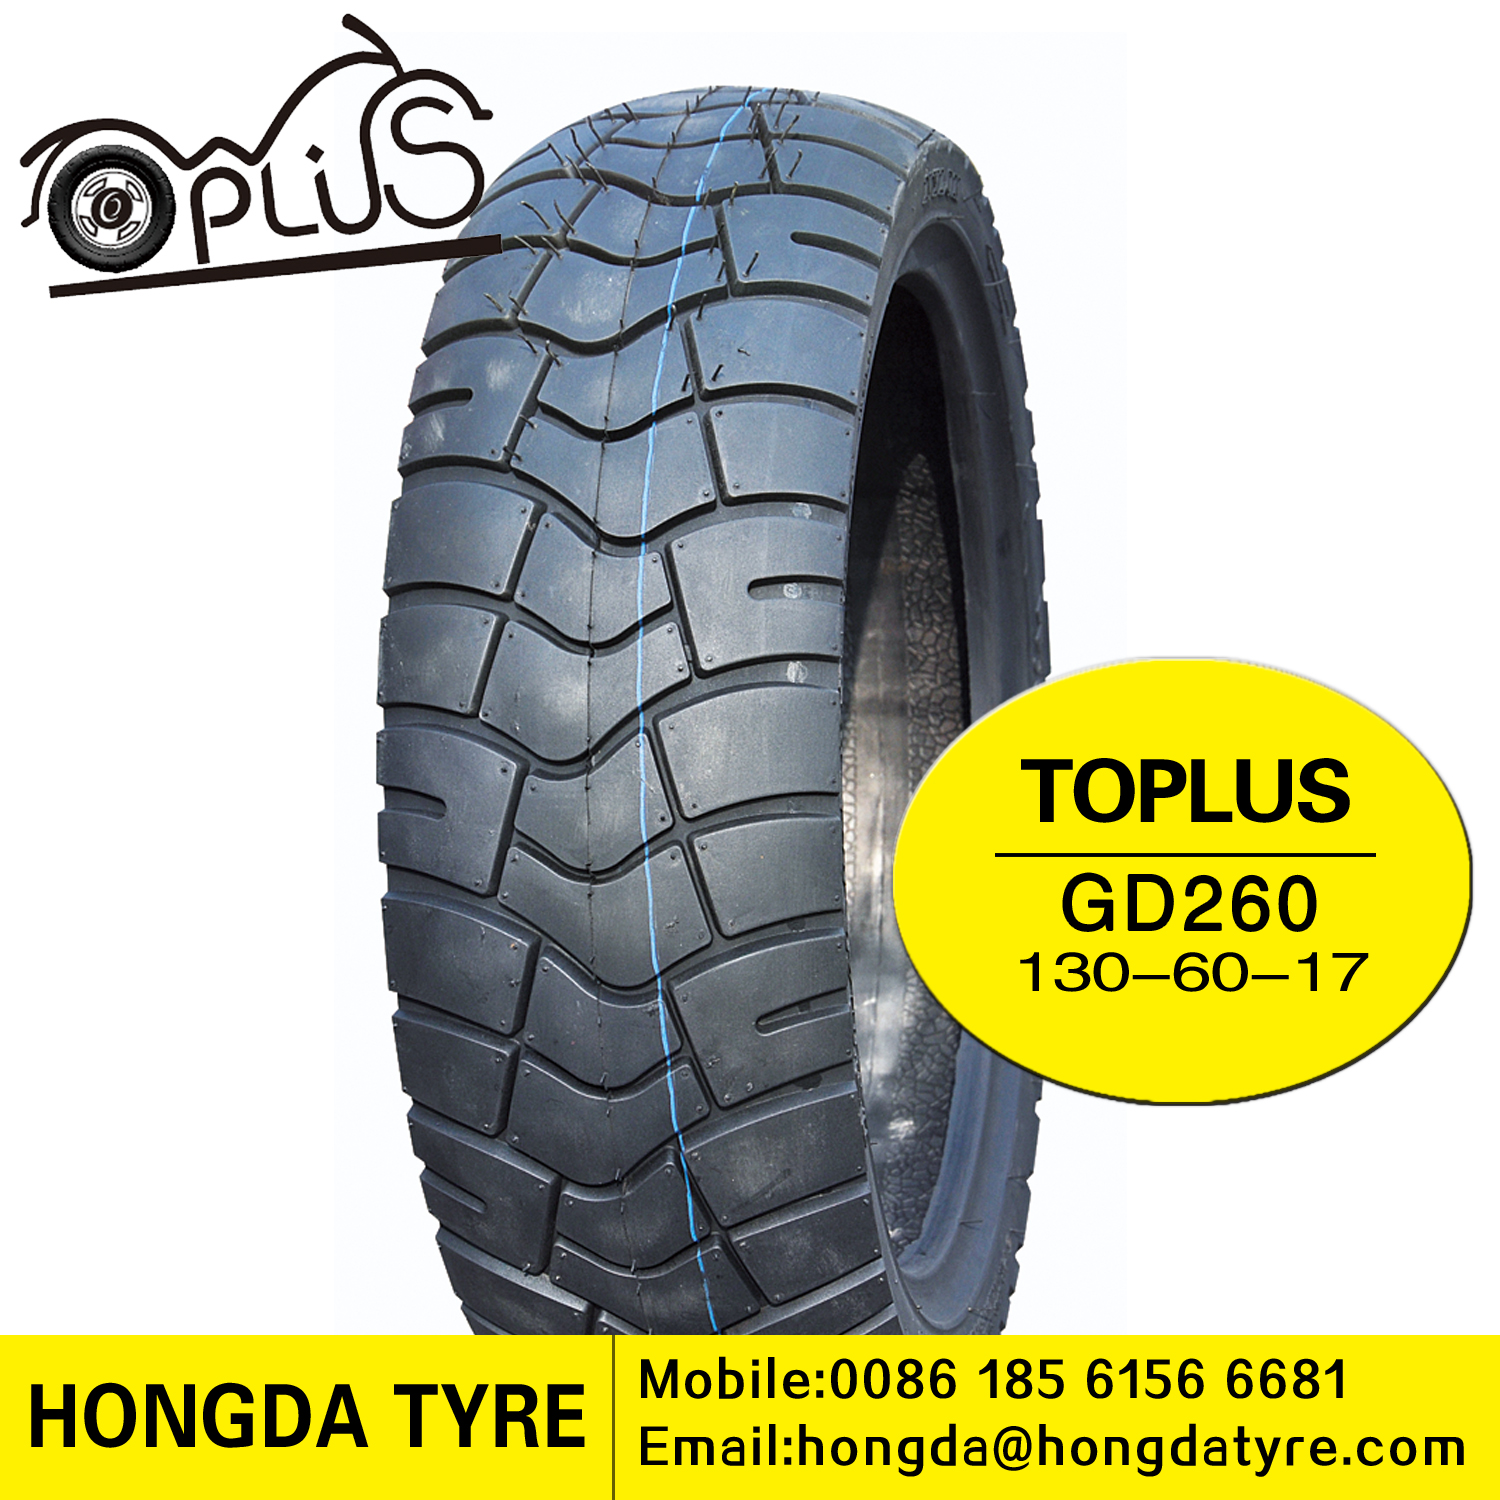 Motorcycle tyre GD260